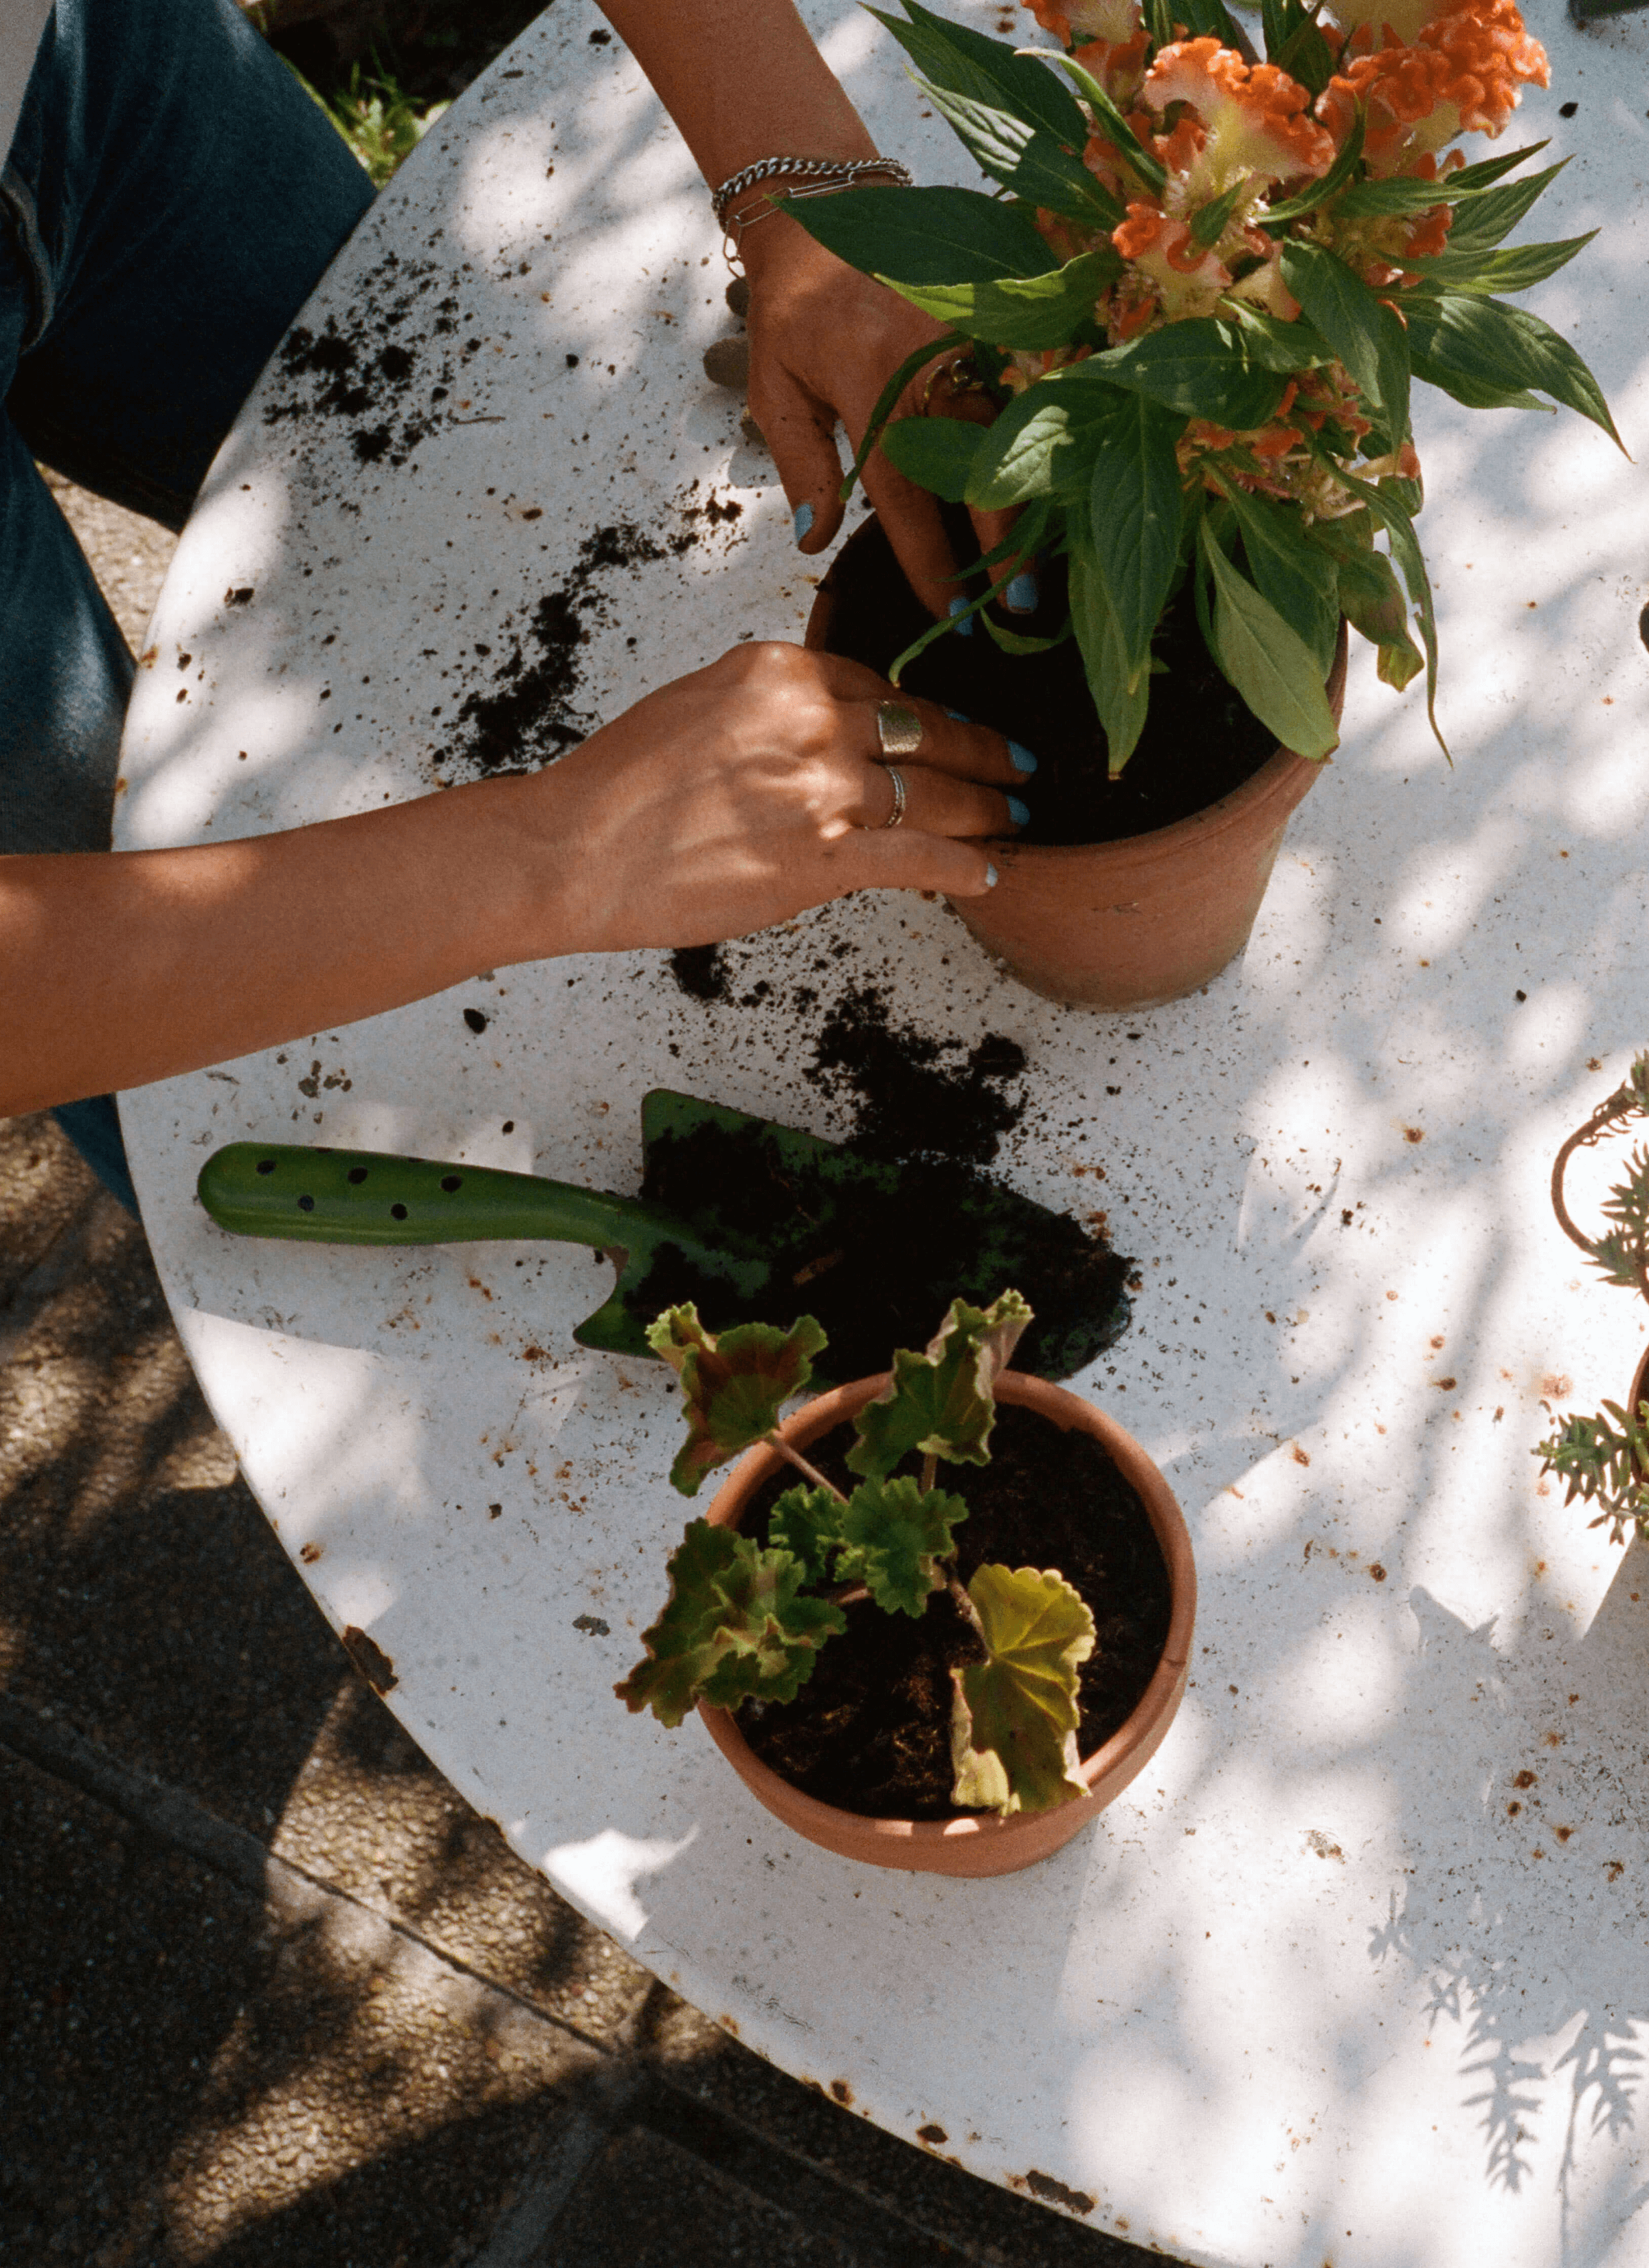 Leslie David plants flowers in a pot with new soil on a white table and there is a green trowel covered with soil next to it with a pot of plants.